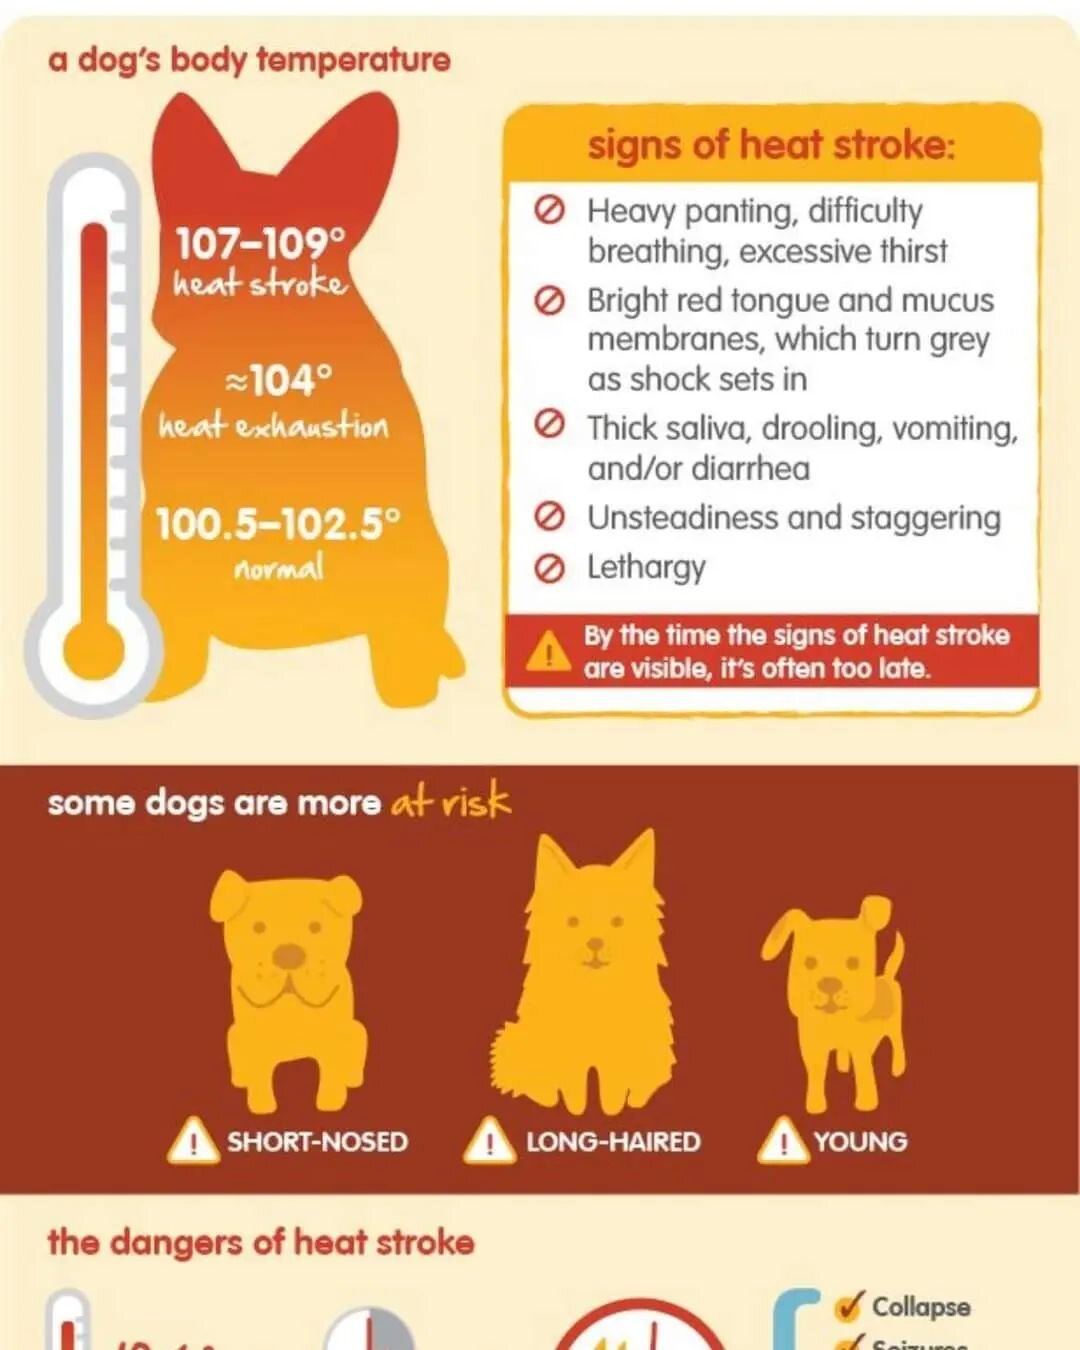 Heat stroke is no joke! Please be mindful of how much time your dog spends in this heat. 

Alternatives to outdoor physical activities are brain games by @nina_ottosson , snuffle matts, training sessions, lick matts and frozen treats! 

#canineenrich